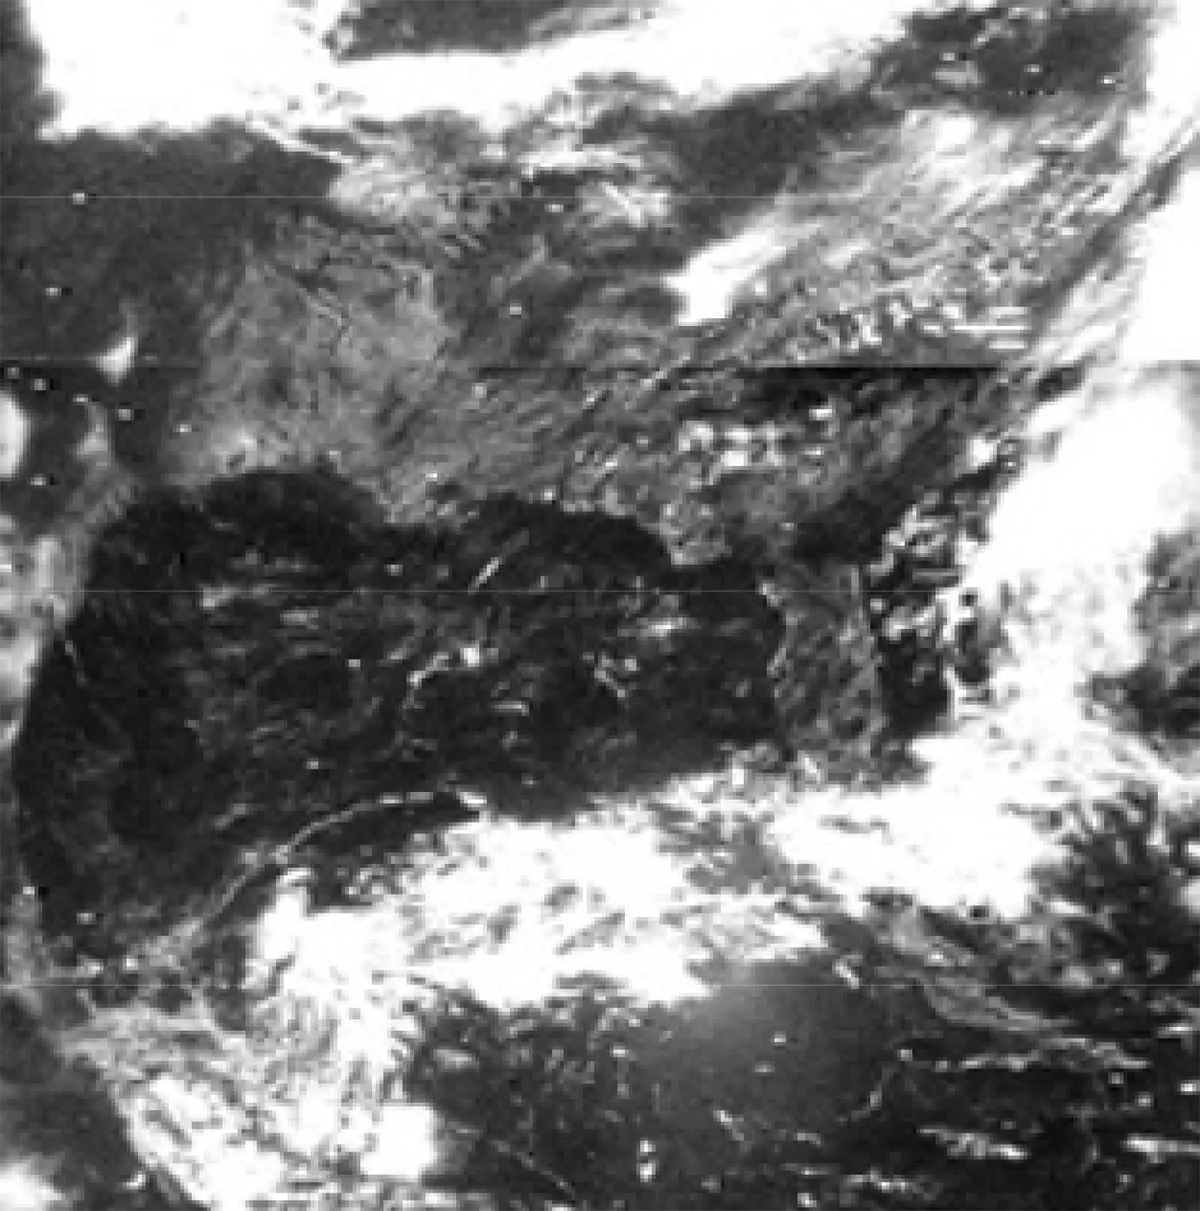 Nimbus-3 satellite view of the southern United States 